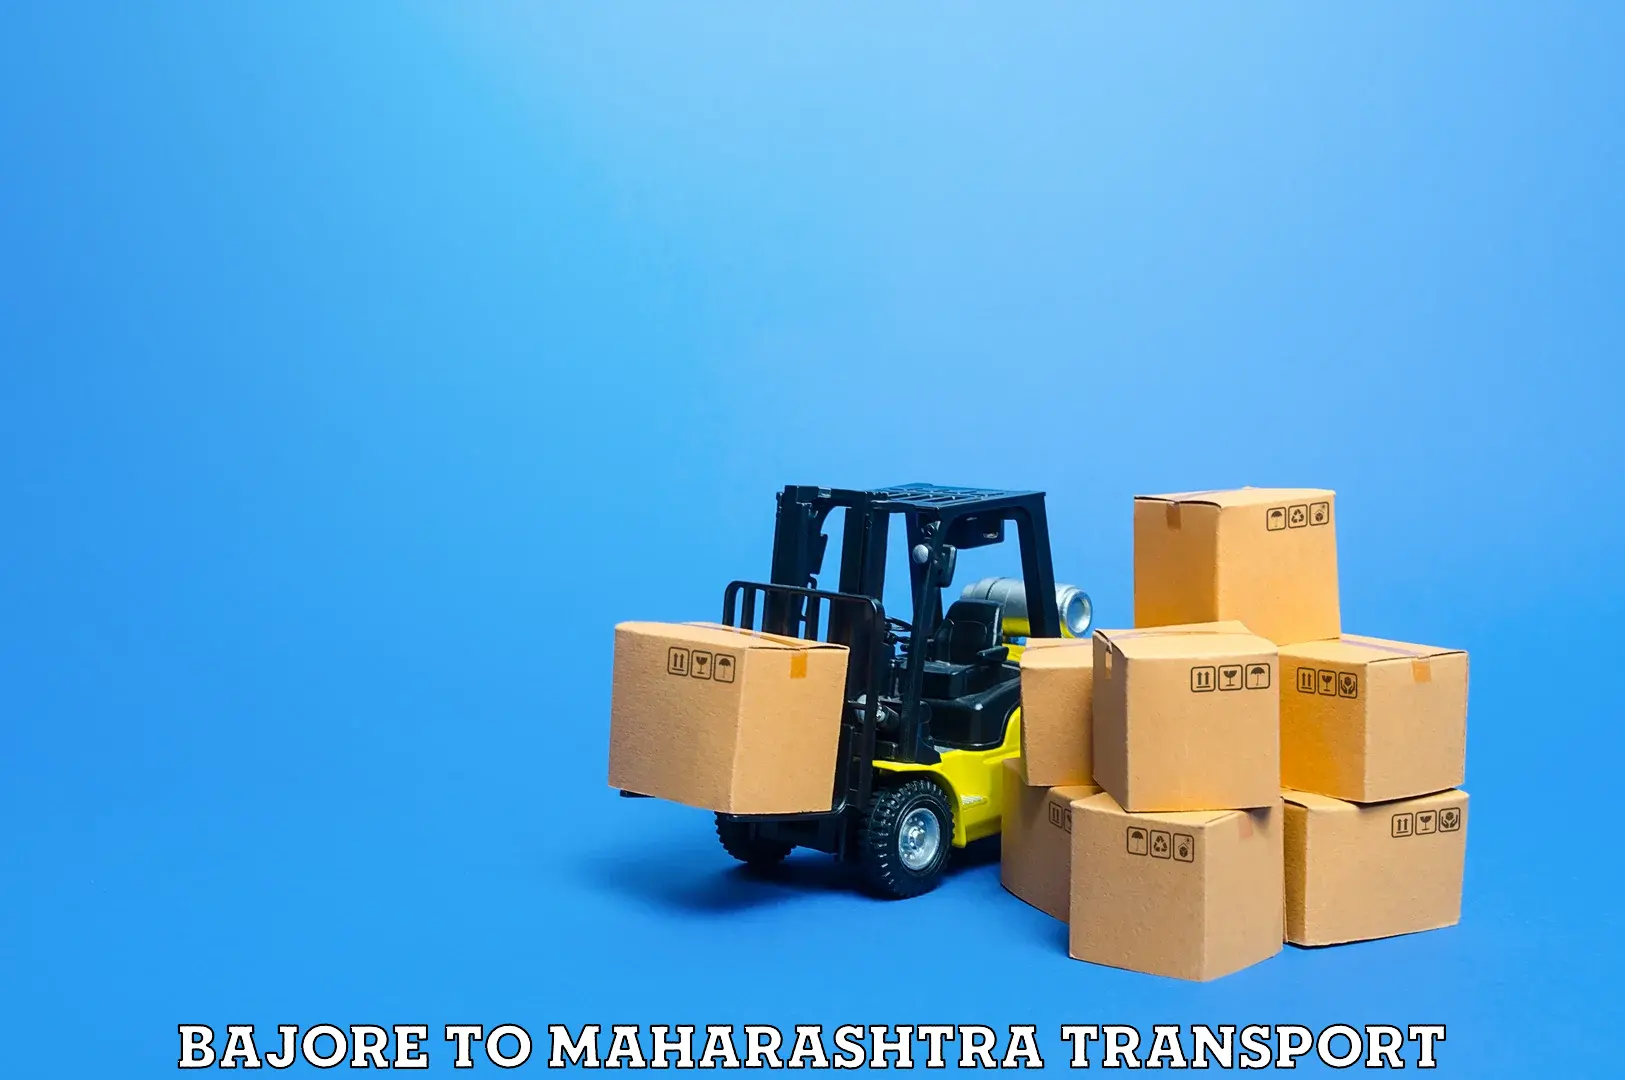 Air freight transport services Bajore to Maharashtra